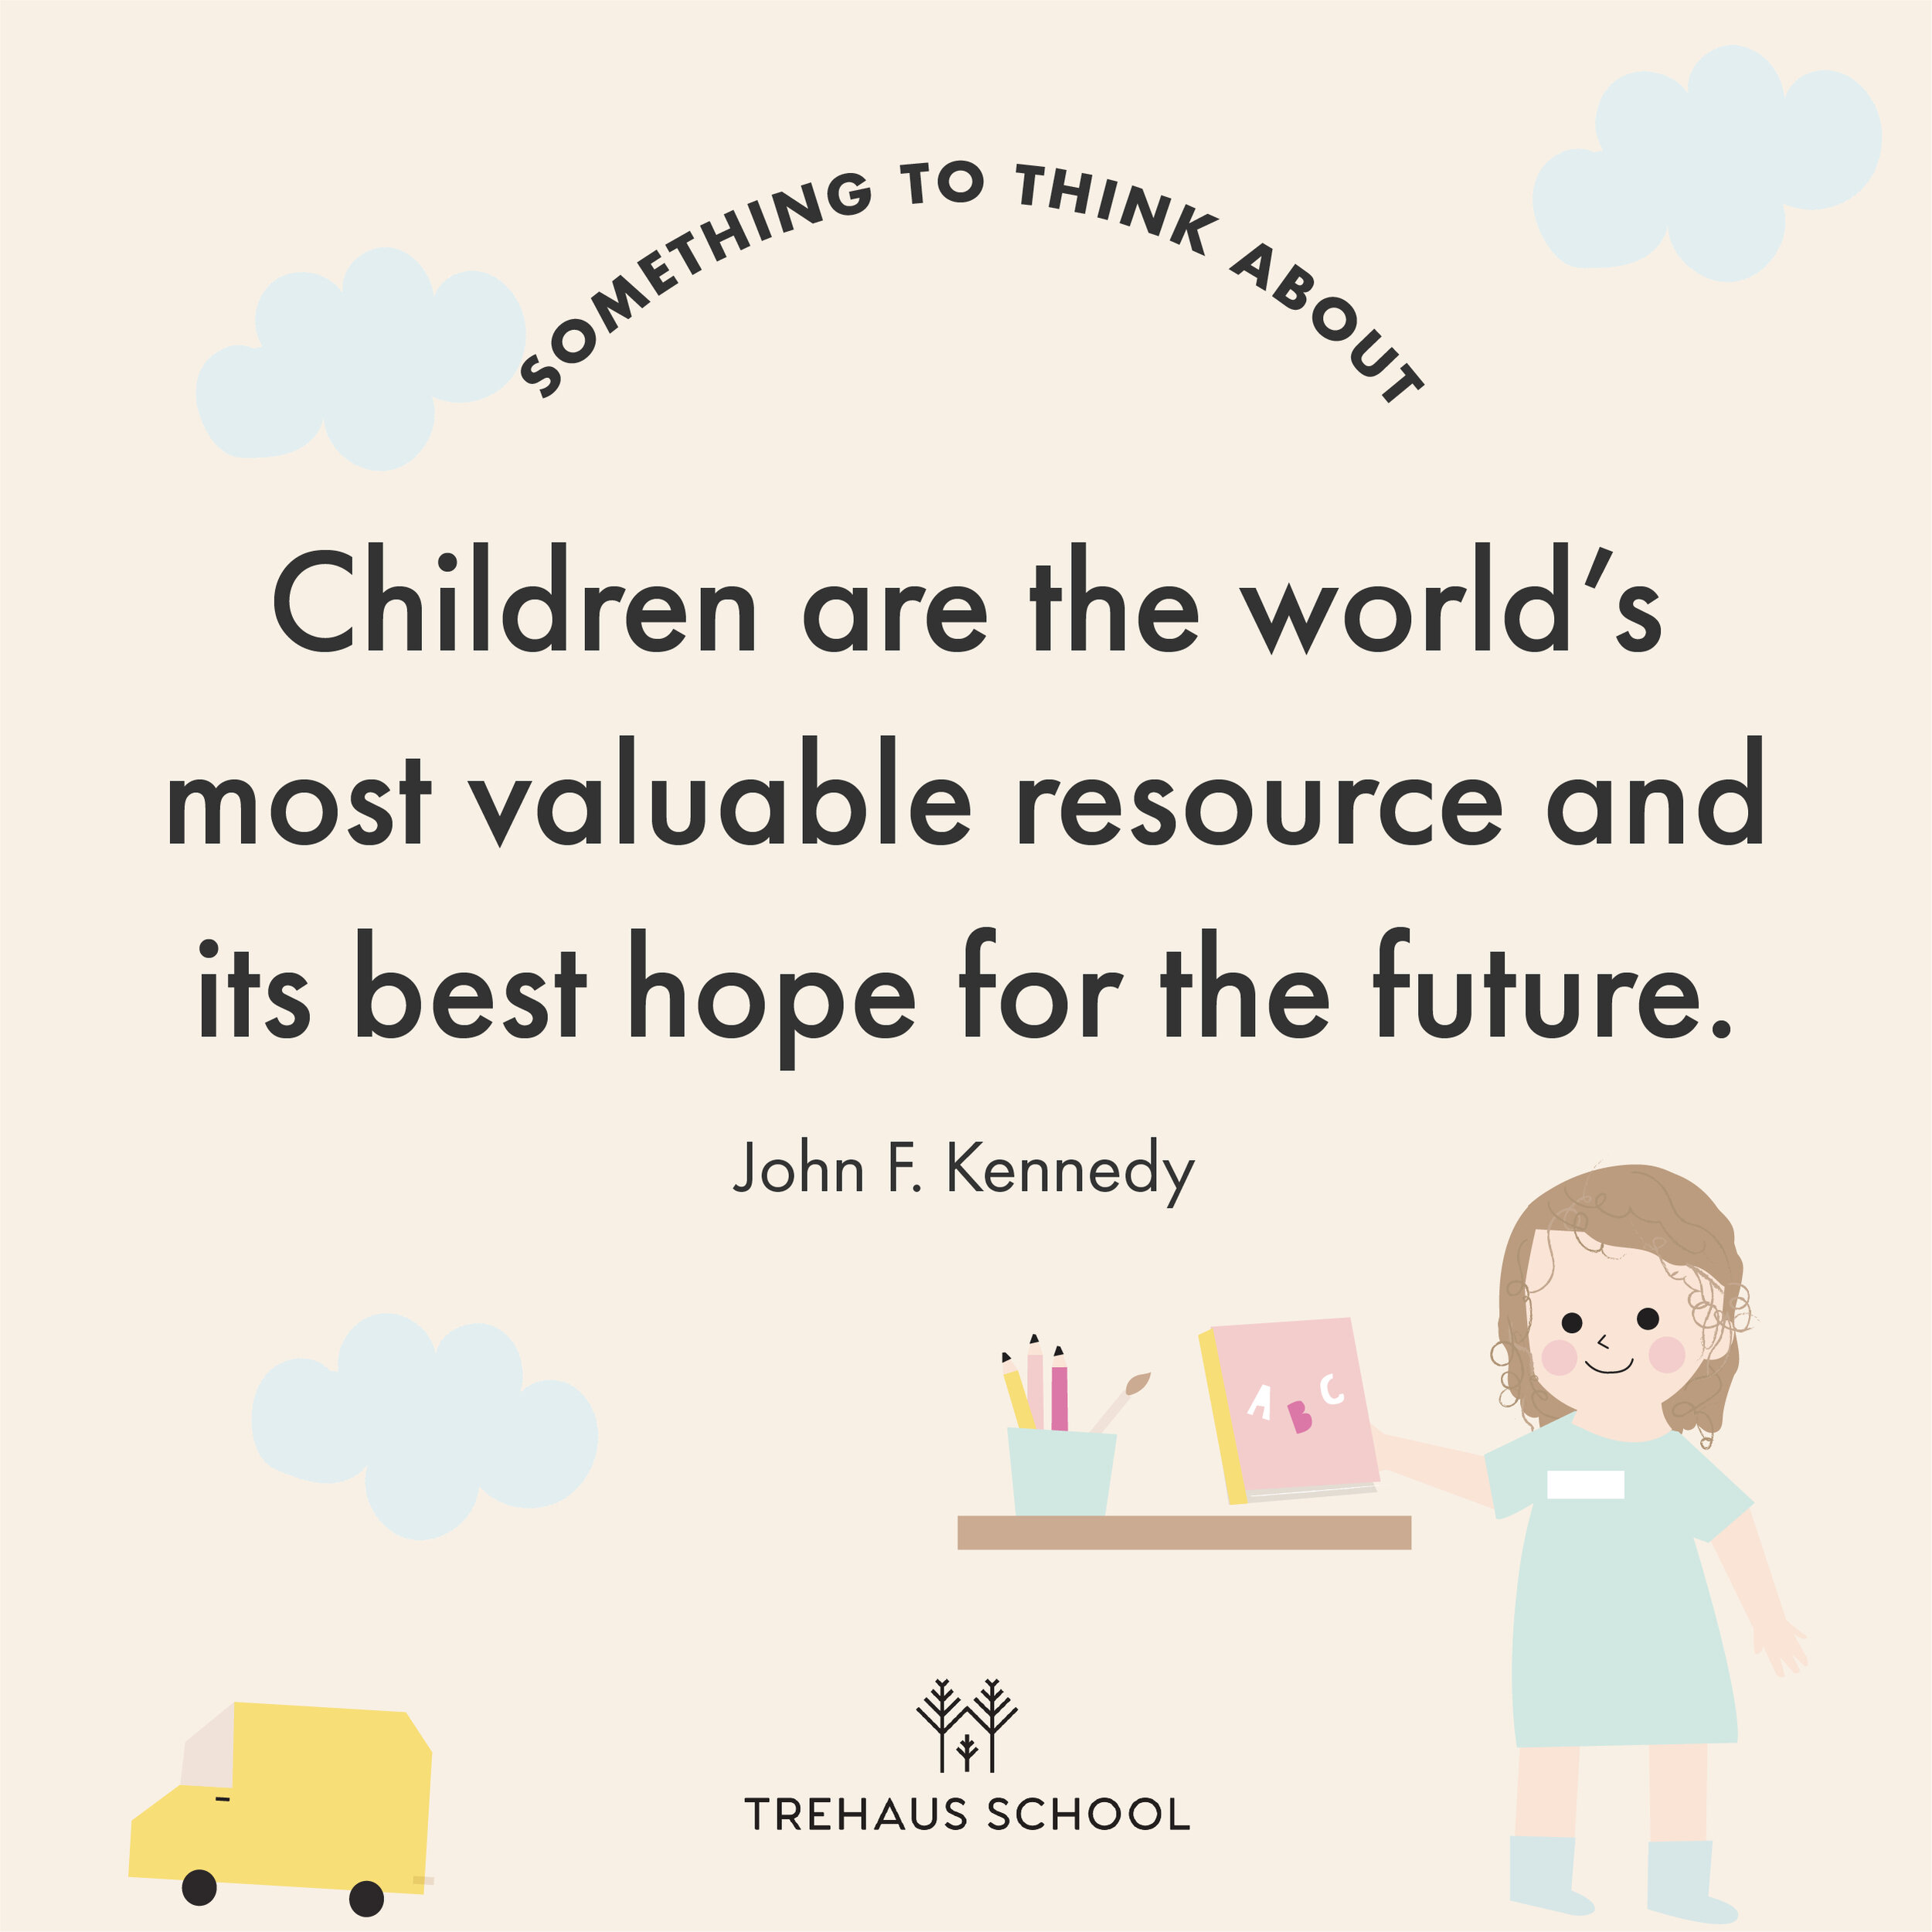 Raising #Changemakers of tomorrow at Trehaus School!⁣
⁣
We focus on building character and future-ready skills to nurture creative problem solvers and lifelong learners with empathy and resilience.⁣
⁣
Trehaus School is centrally-located (Robertson Qu